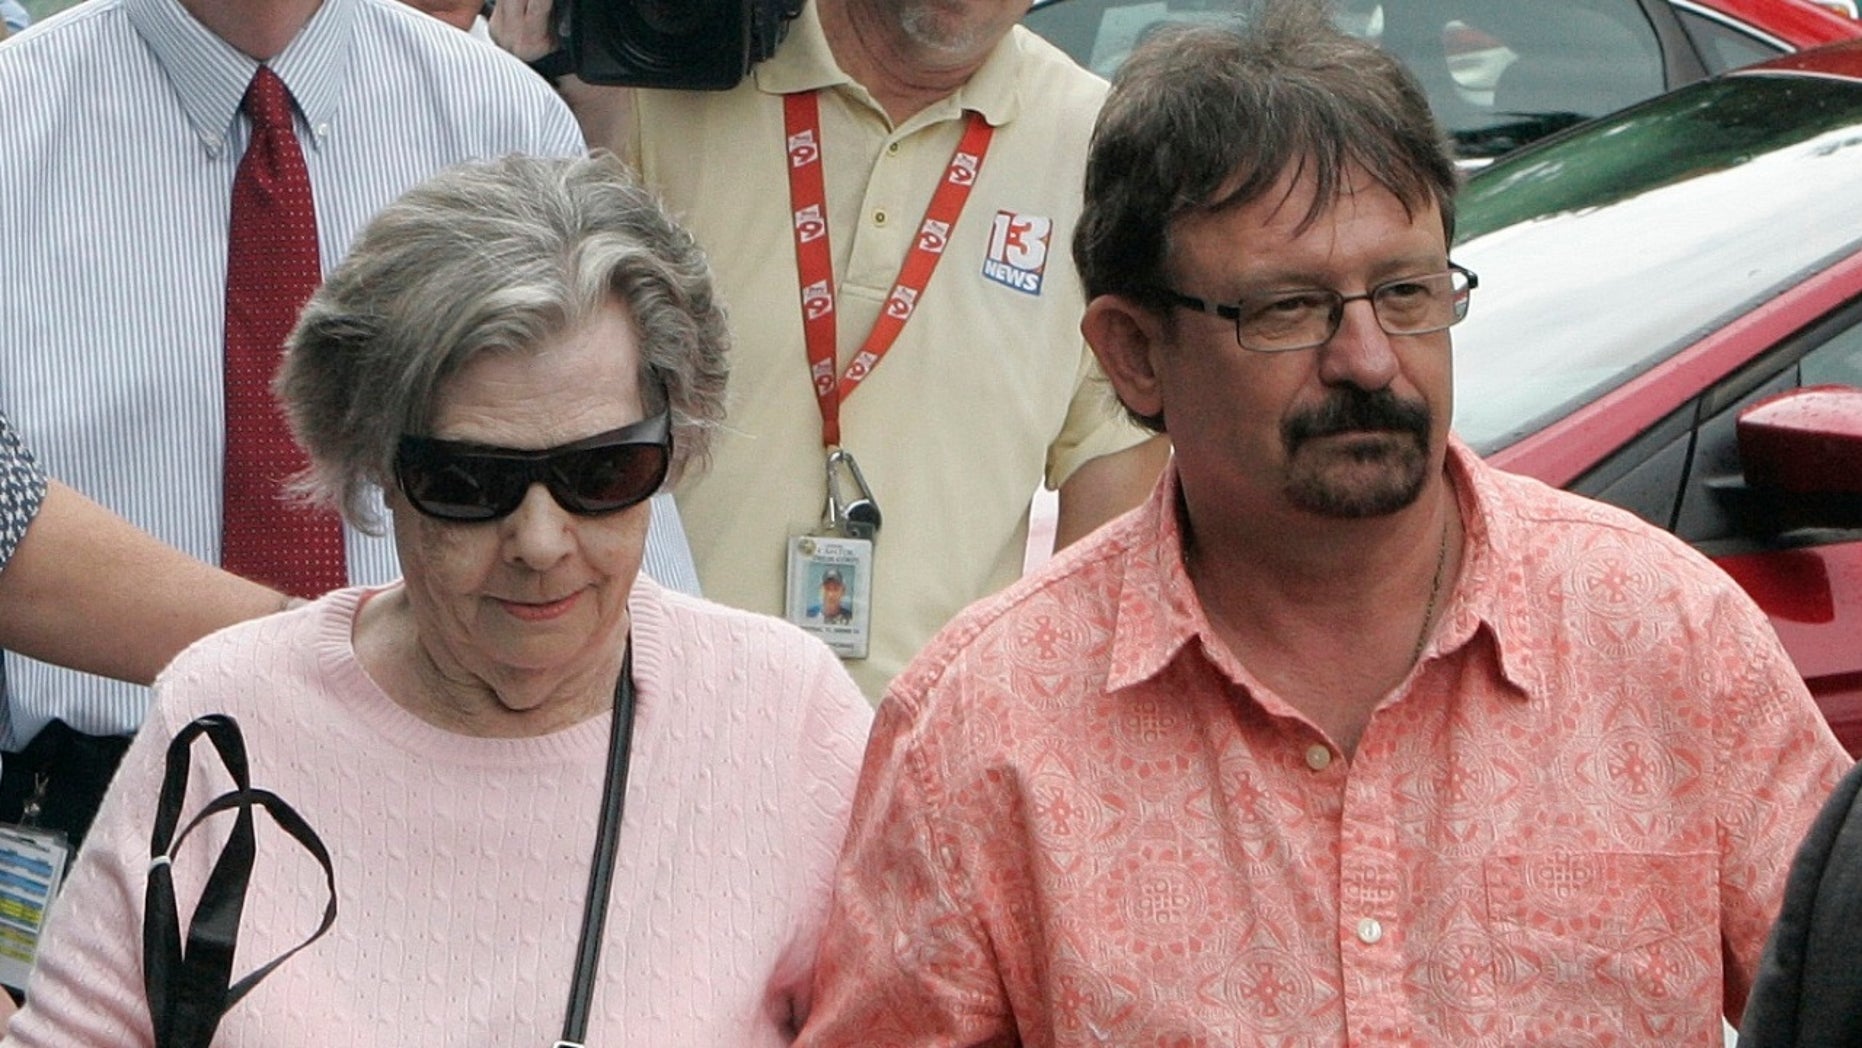 Gloria Mackenzie, 90, who had won $ 278 million from a Powerball winning ticket six years ago, sued her son Scott Mackenzie and his financial advisers, claiming the money had been placed in low yielding investments while she was getting paid $ 2 million. fees. 